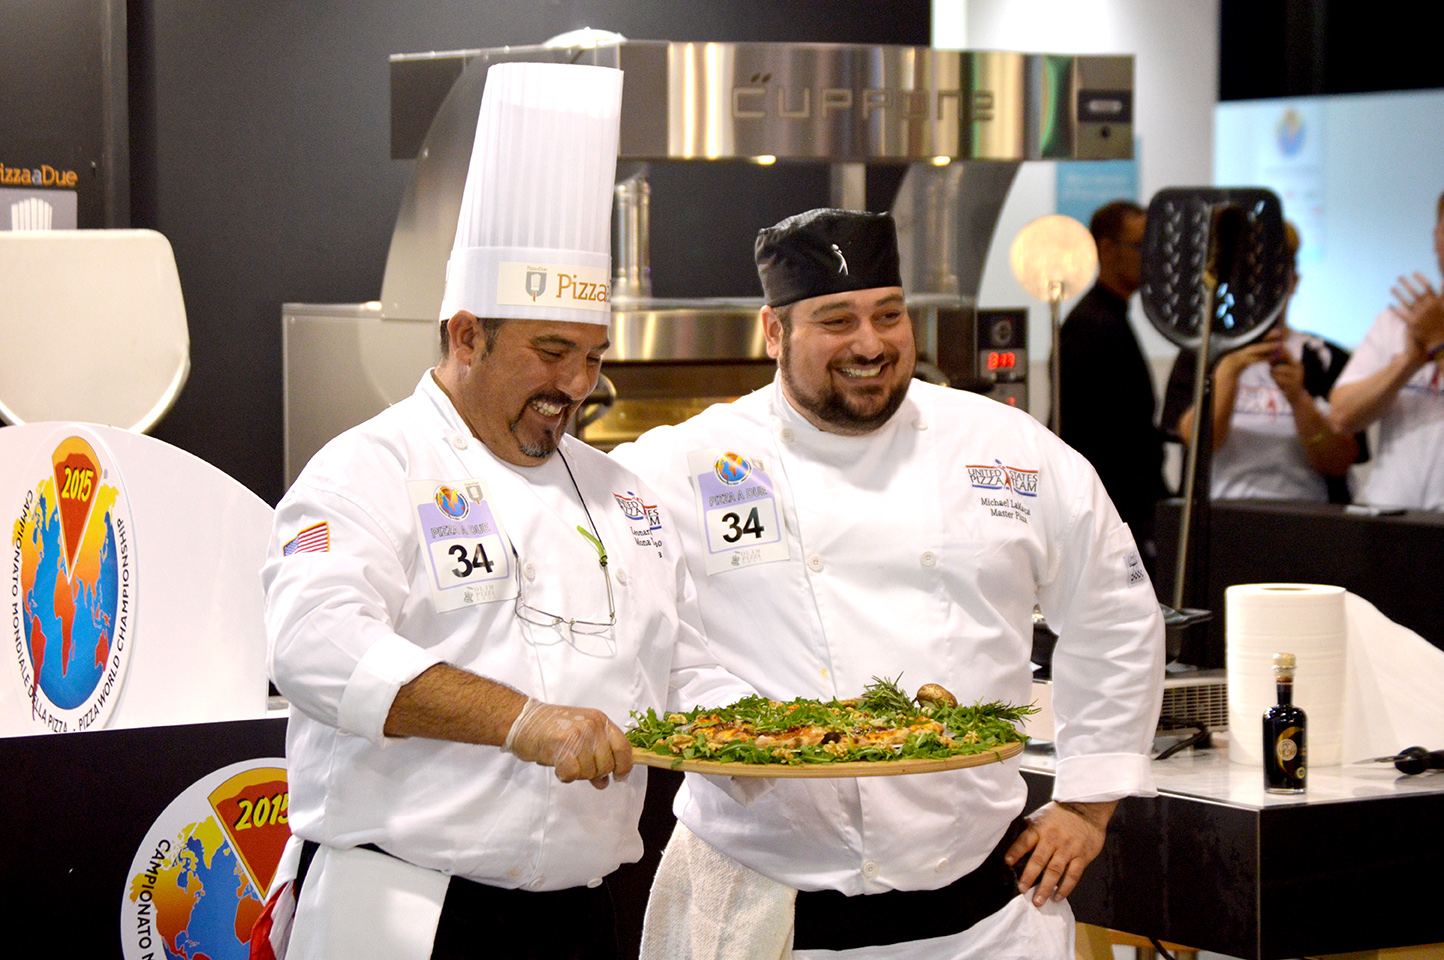 LaMarca, right, and Lenny Giordano present their pizza at the 2015 World Pizza Championships, Parma, Italy.